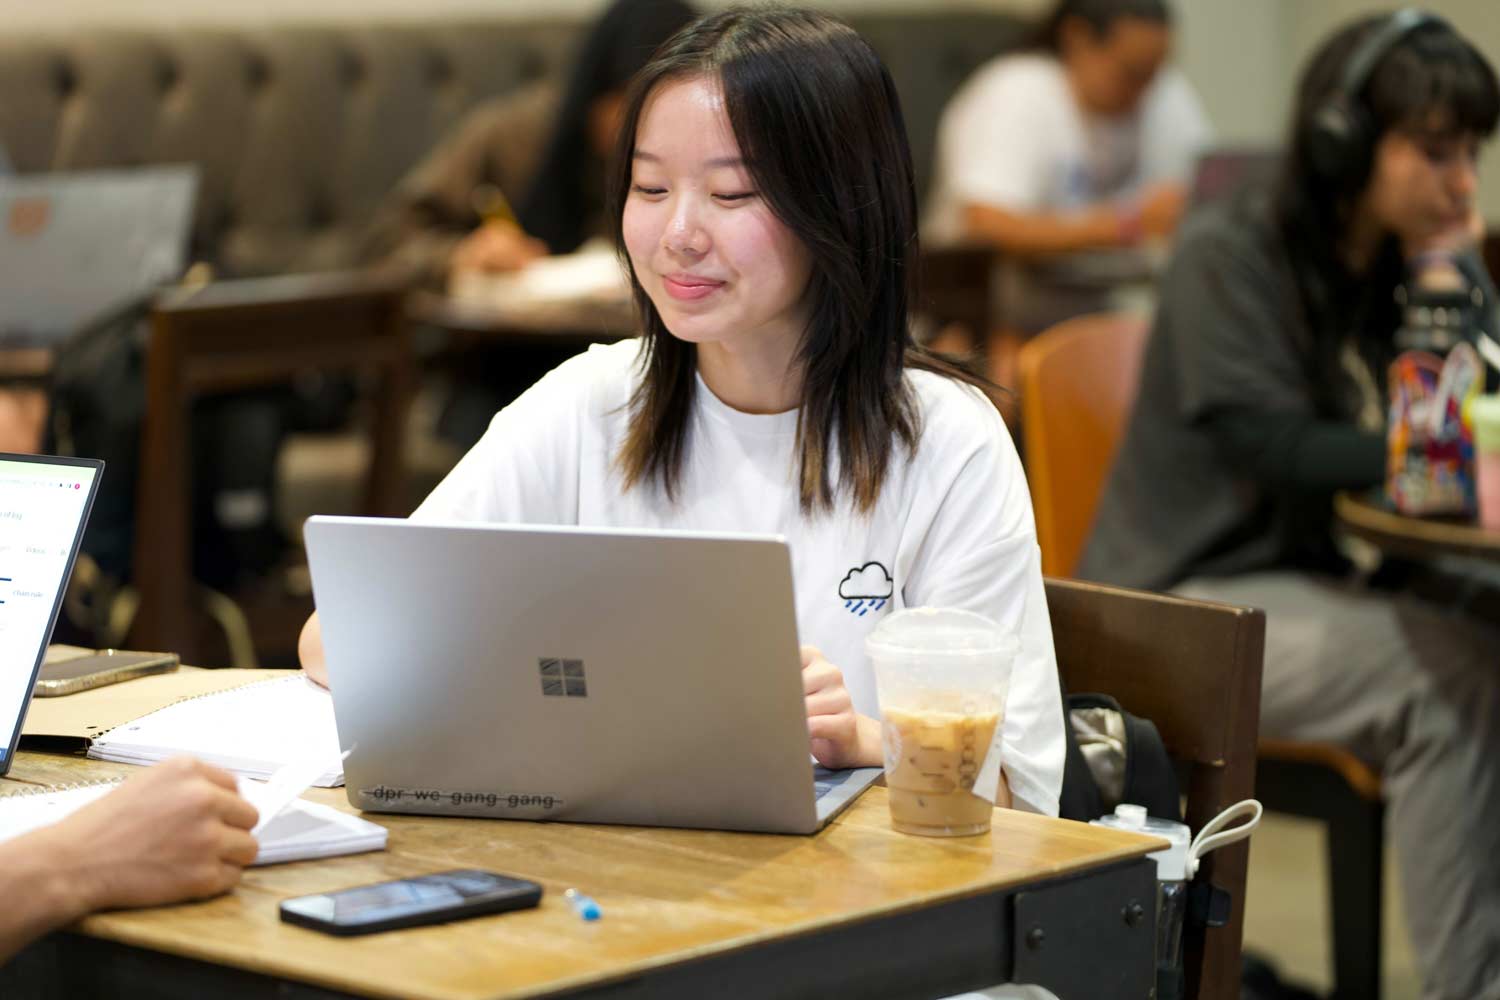 Texas A&amp;M Student works diligently on her laptop in the Evans Library Starbucks